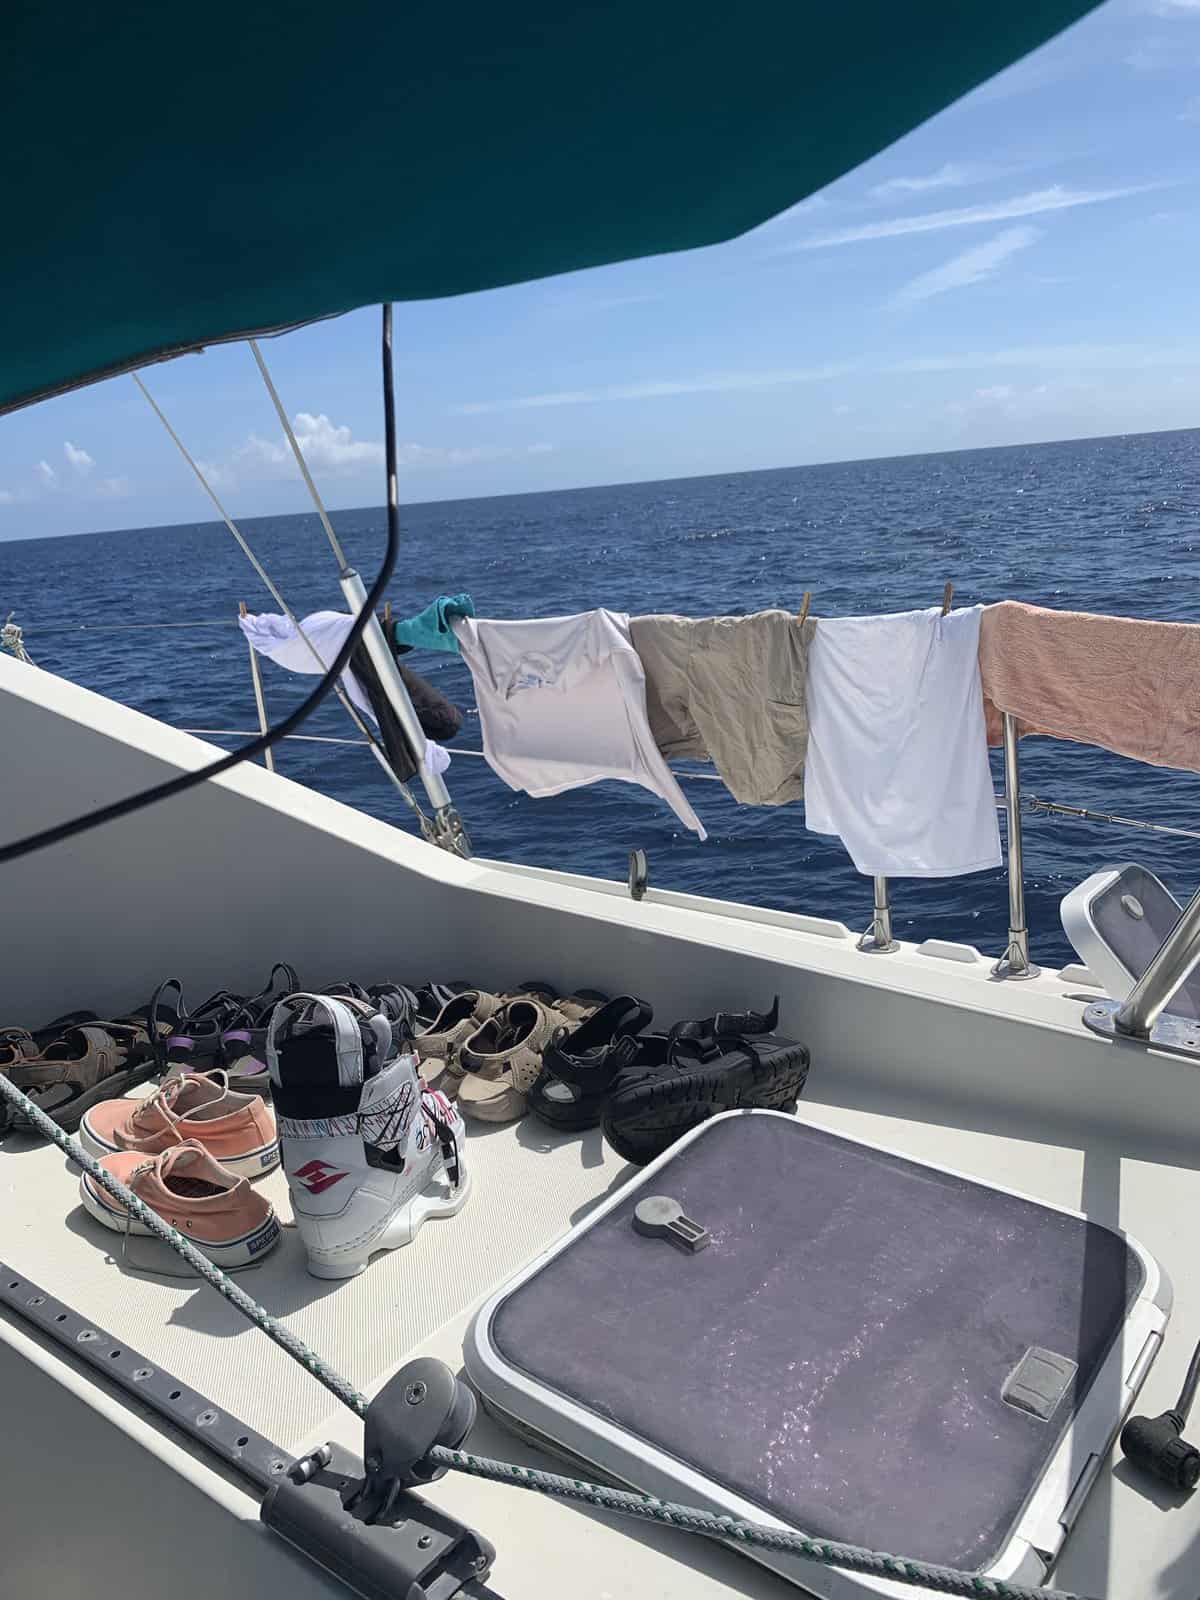 laundry drying on a boat